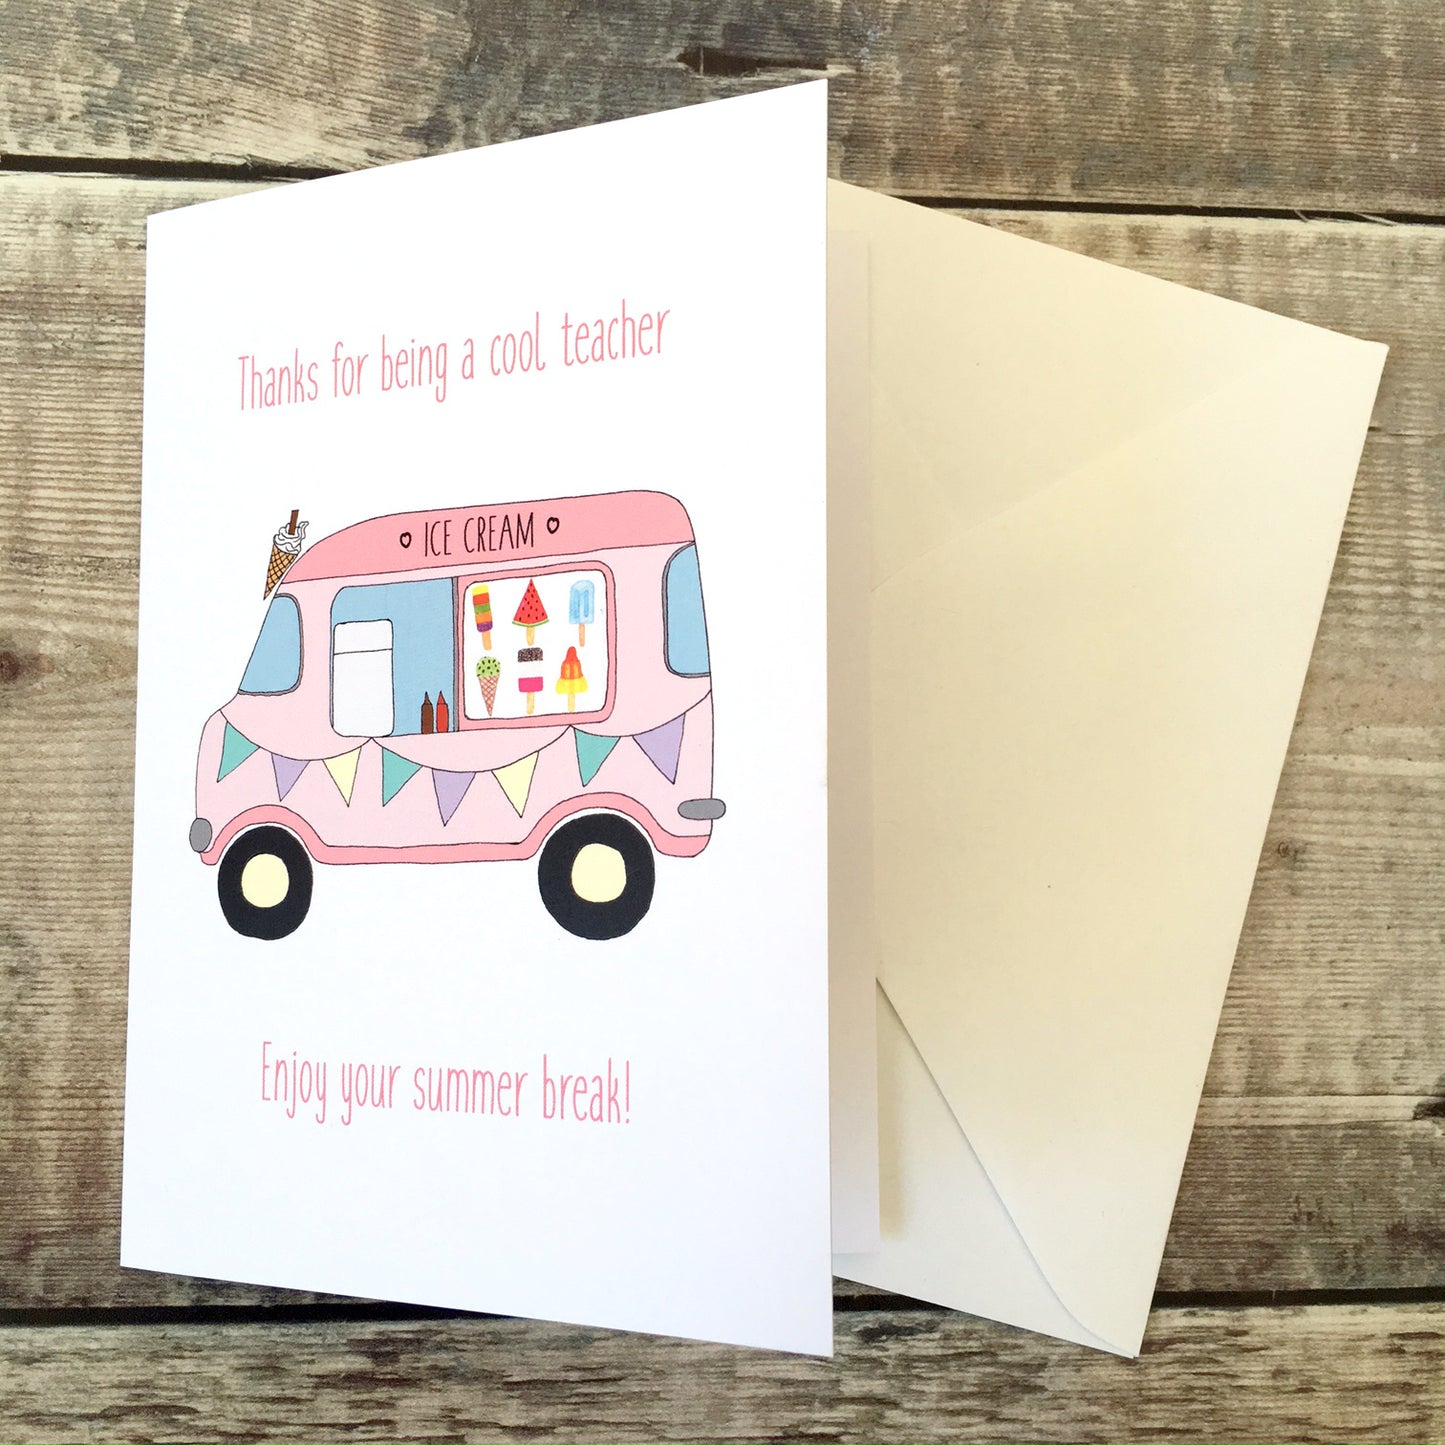 Cool teacher card - Thank you card for teaching staff - End of term gift